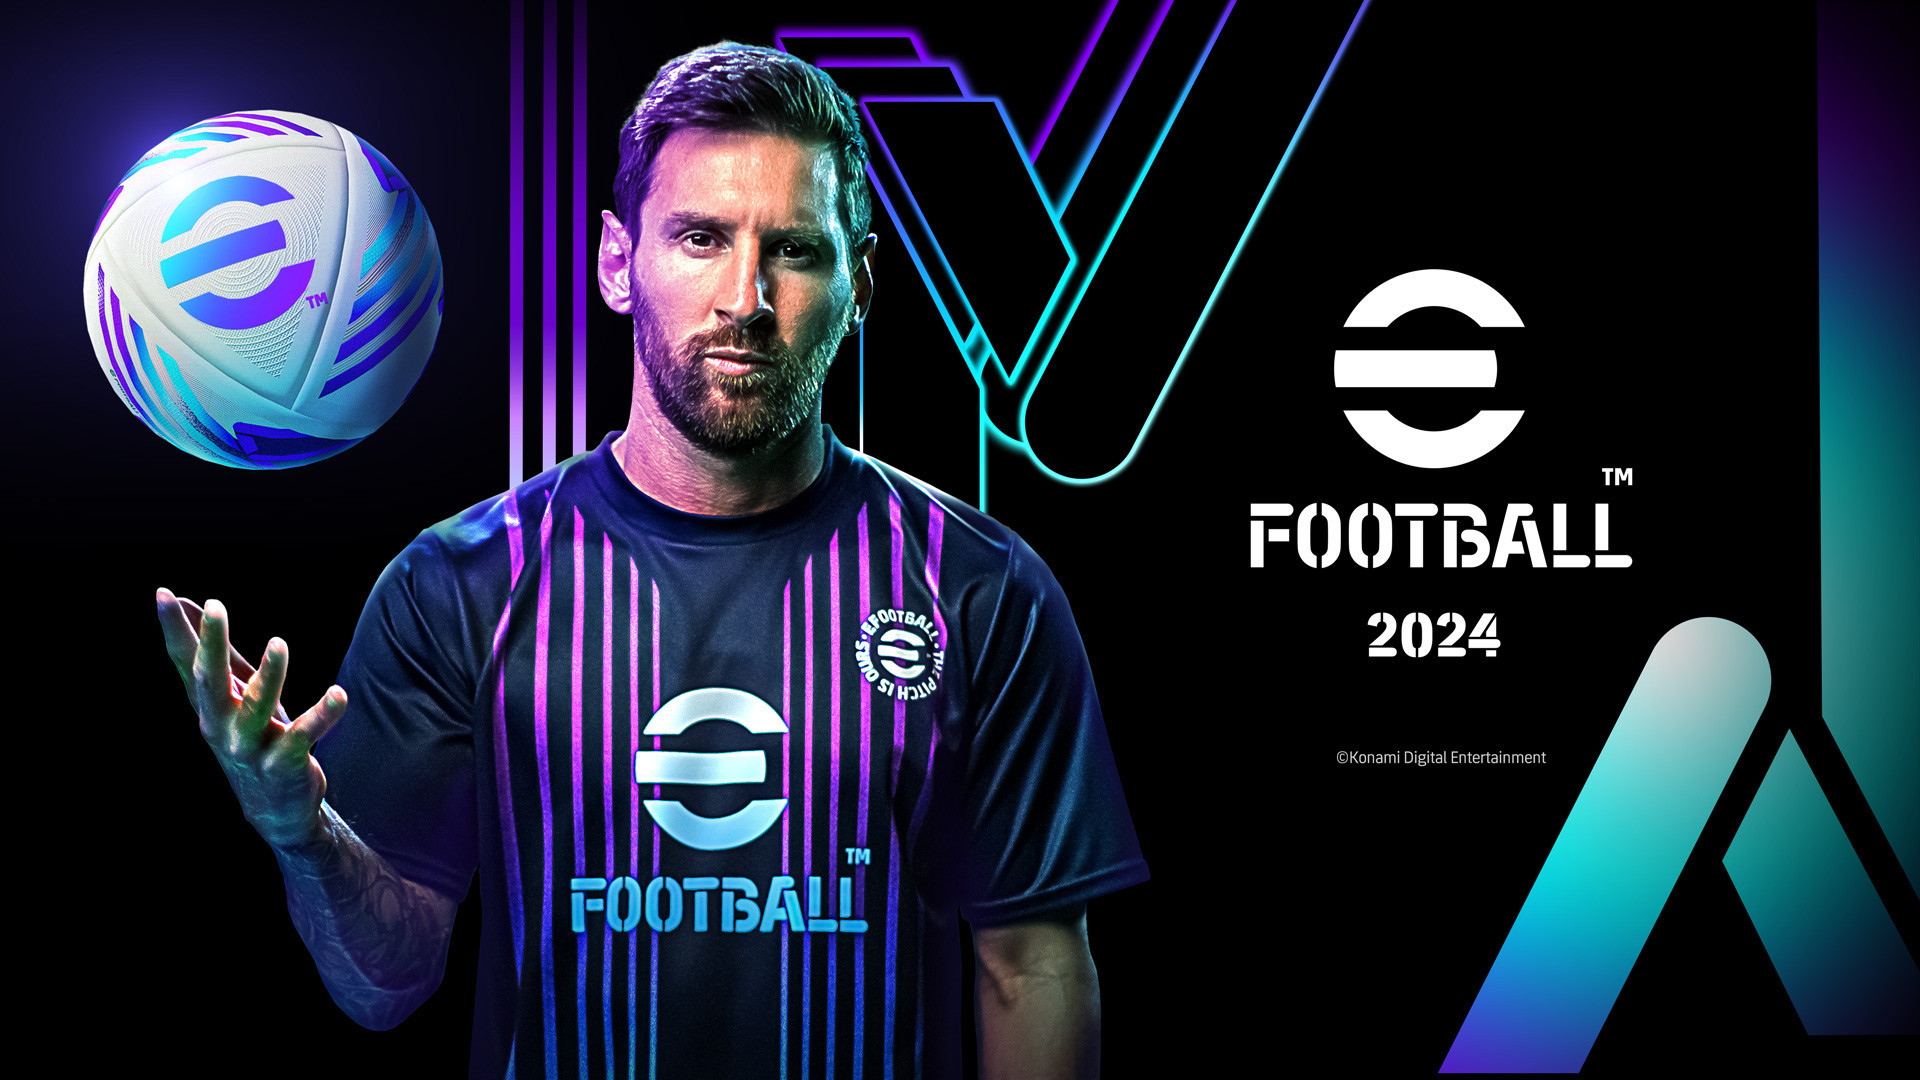 Messi remains cover star for Konami's release of eFootball 2024